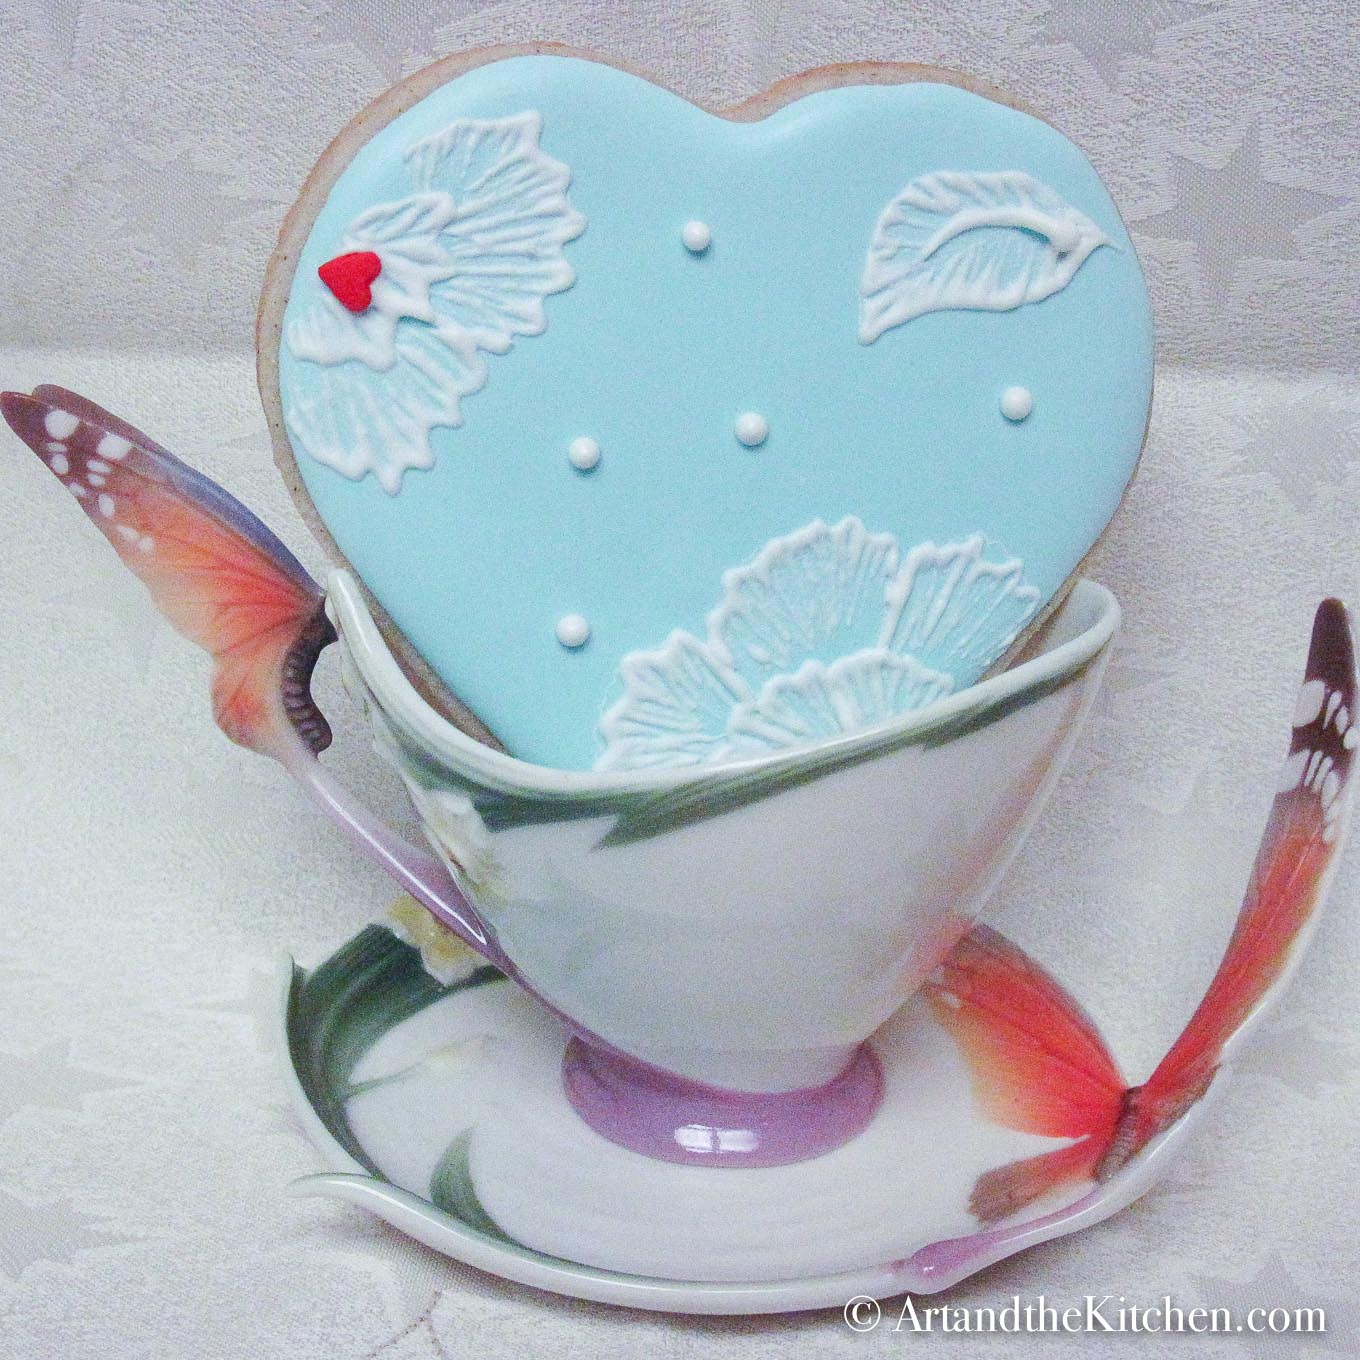 Blue heart shaped decorated cookie in decorative tea cup.